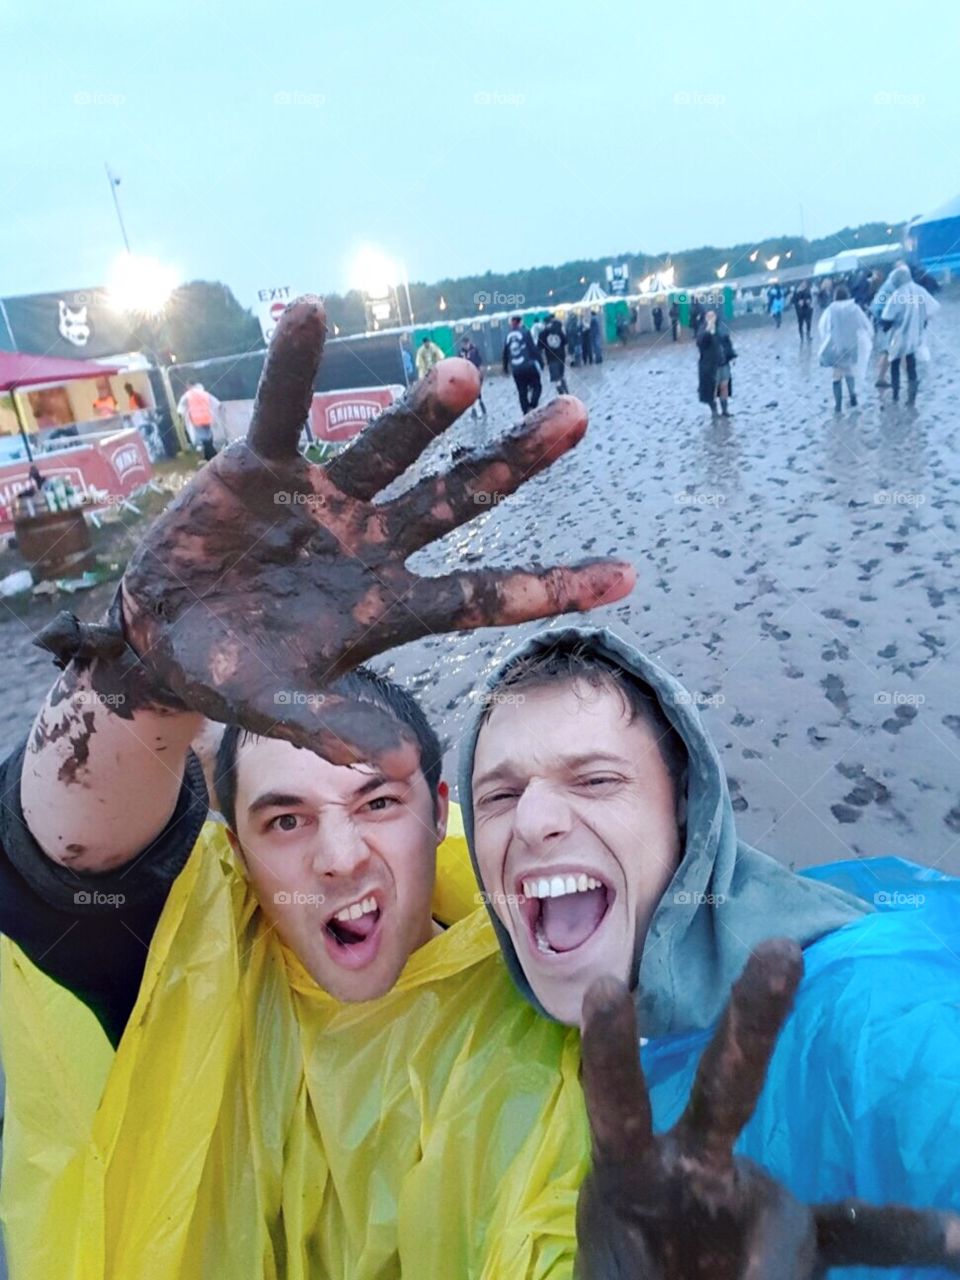 Covered in Mud and ready to rock at Download music festival 